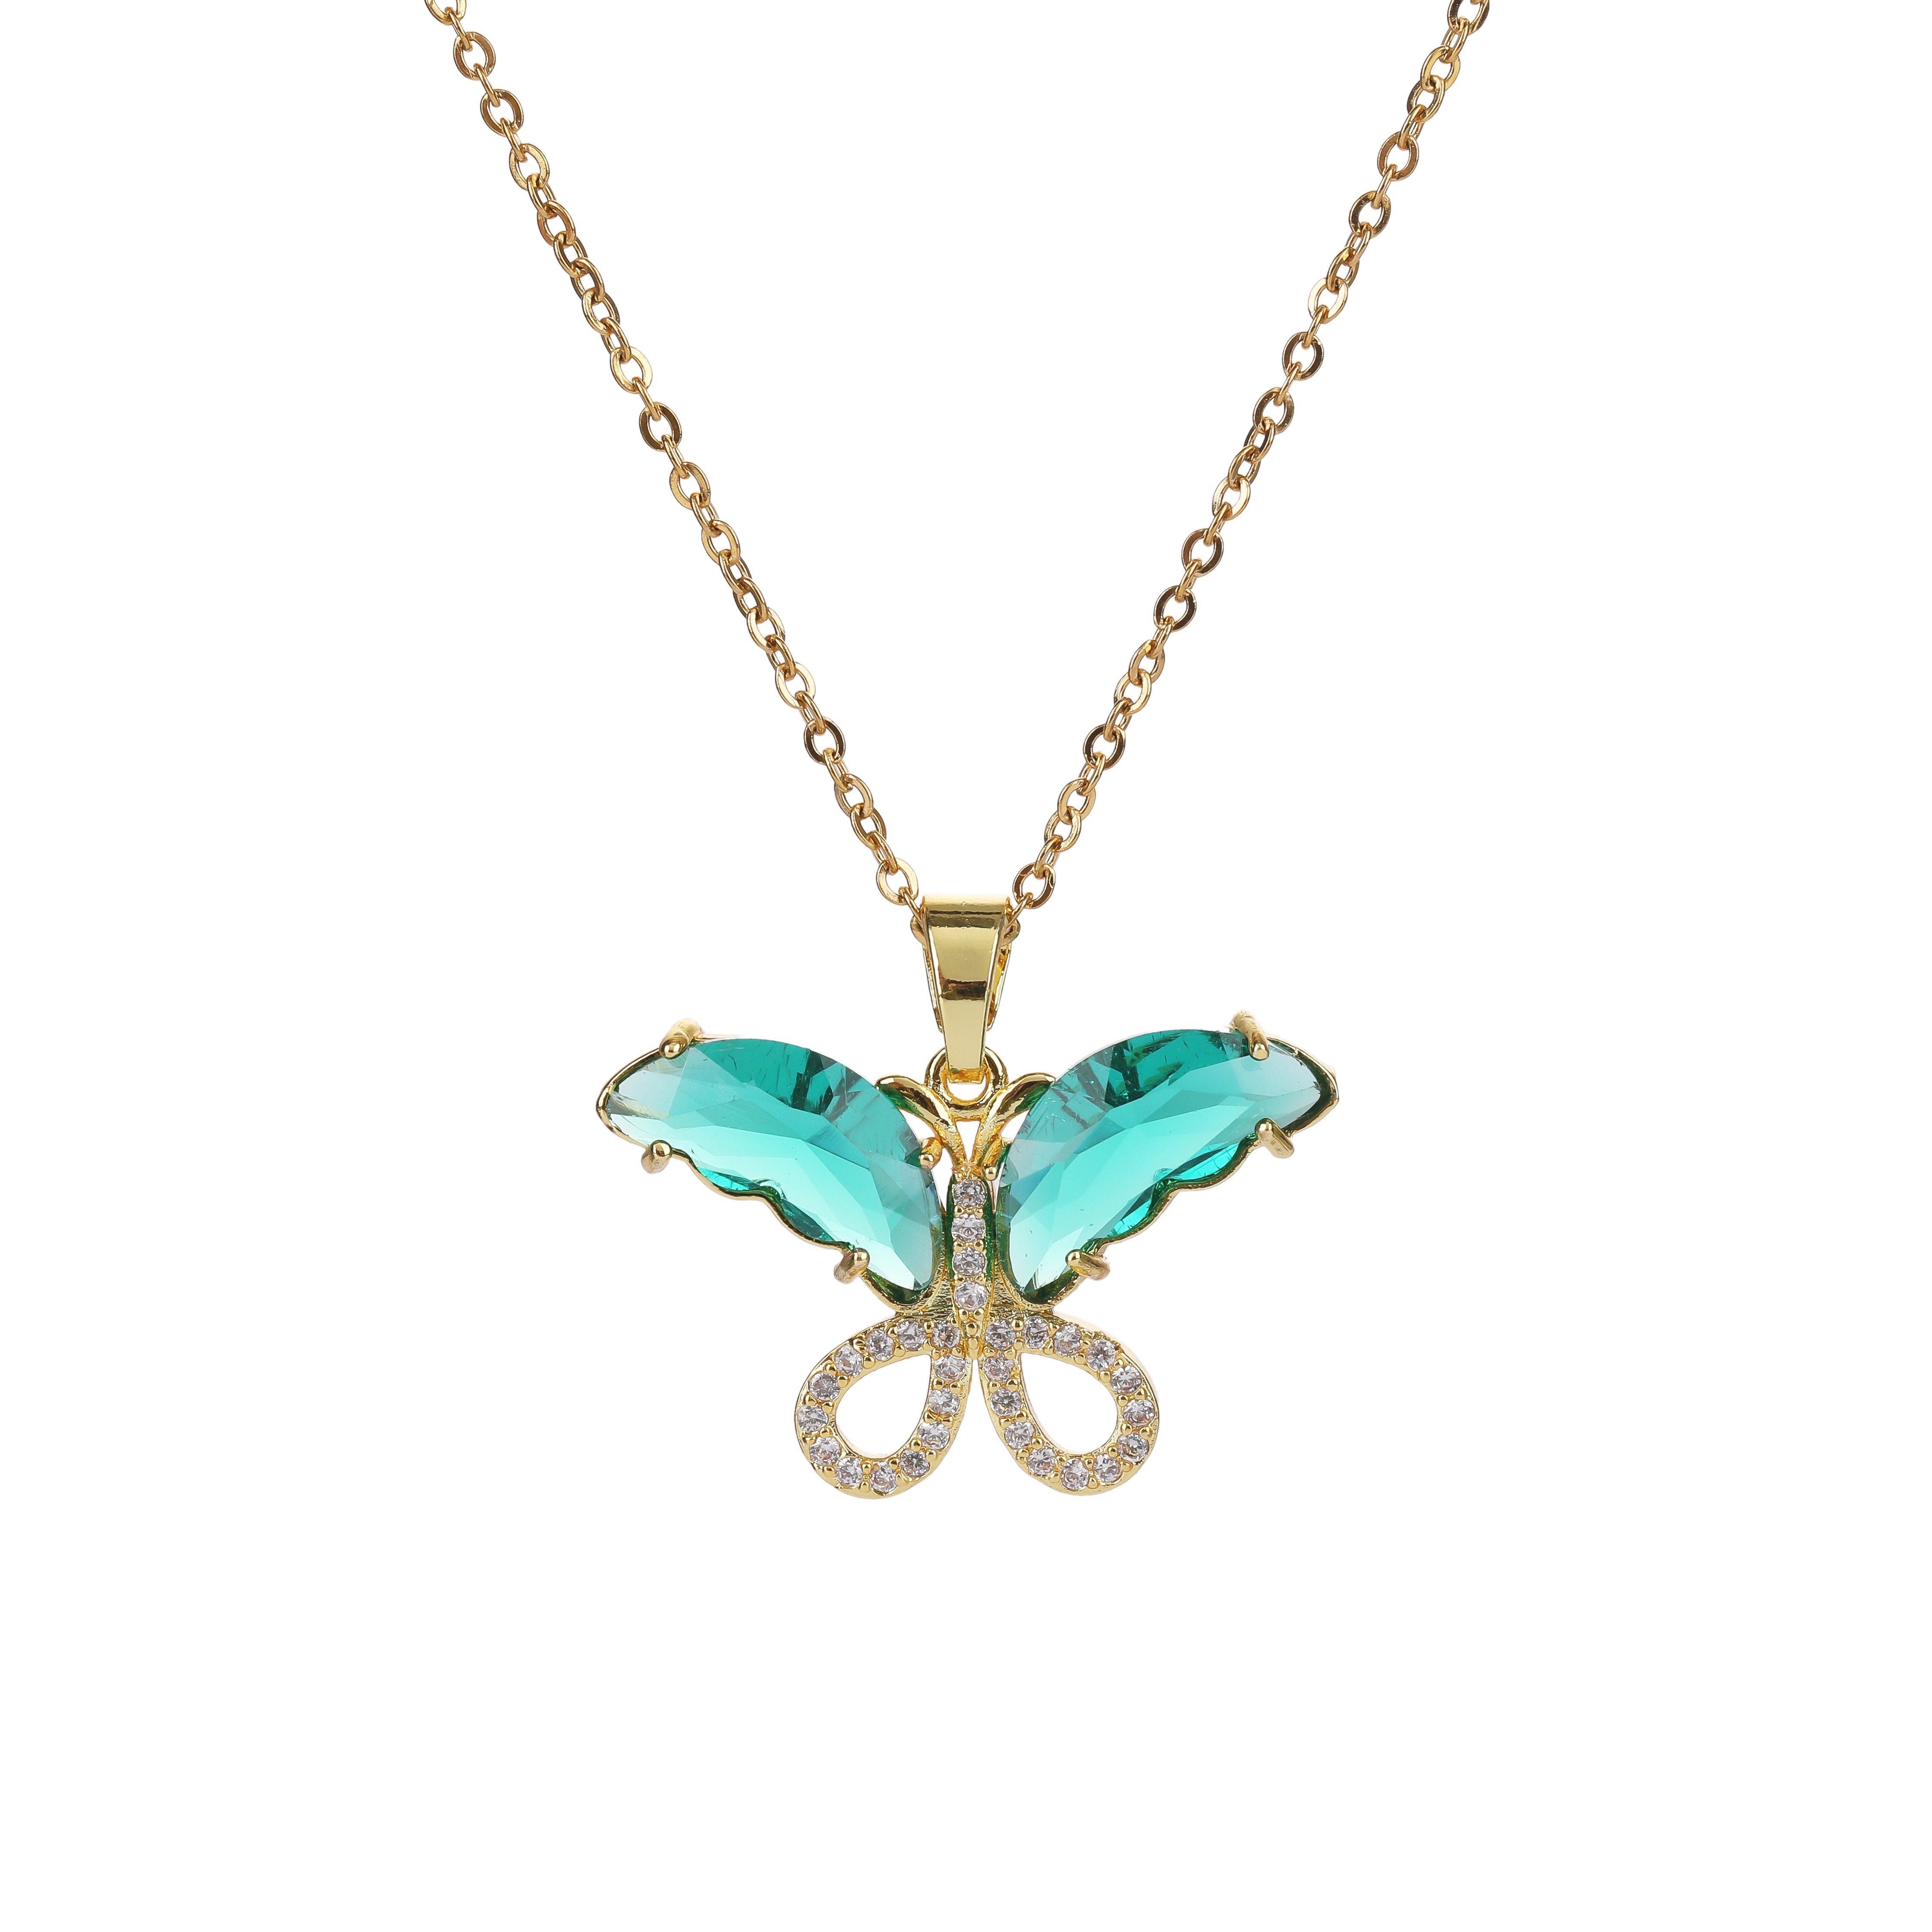 Gold Plated Micro Pave Butterfly Pendant Necklace, Stainless Steel